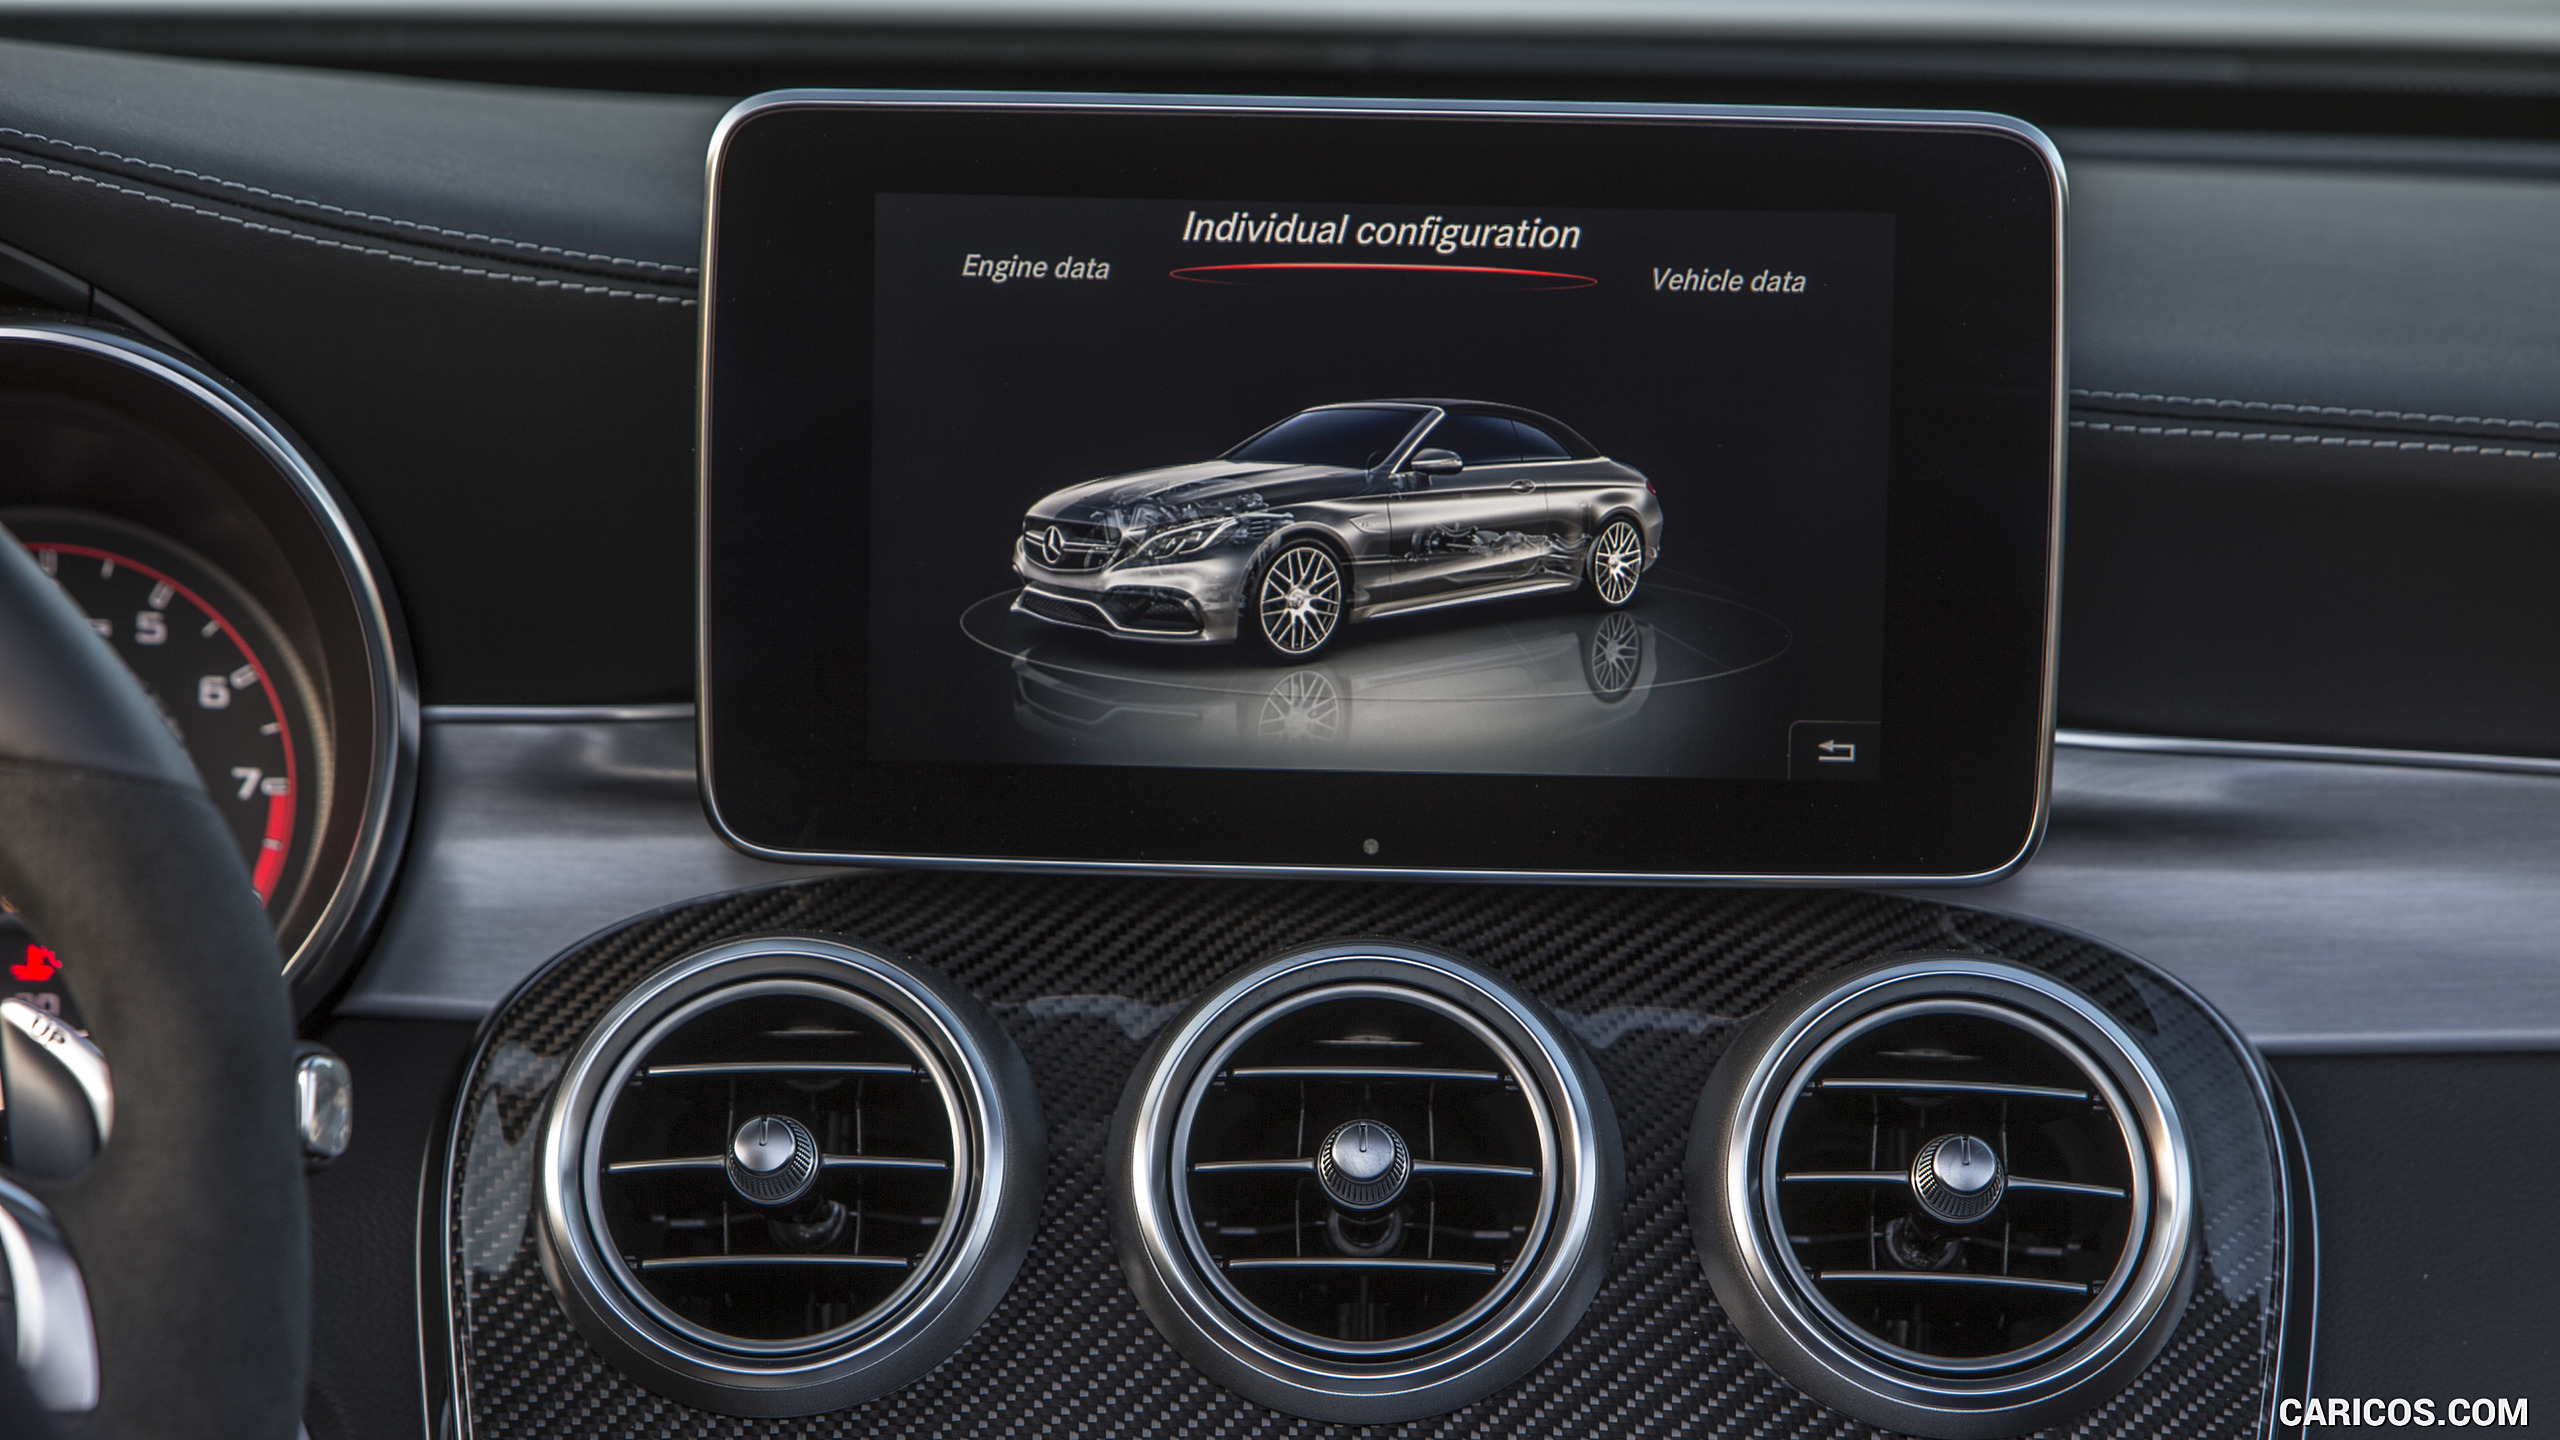 2017 Mercedes-AMG C63 S Cabriolet - Infotainment Screen - Central Console, #165 of 222